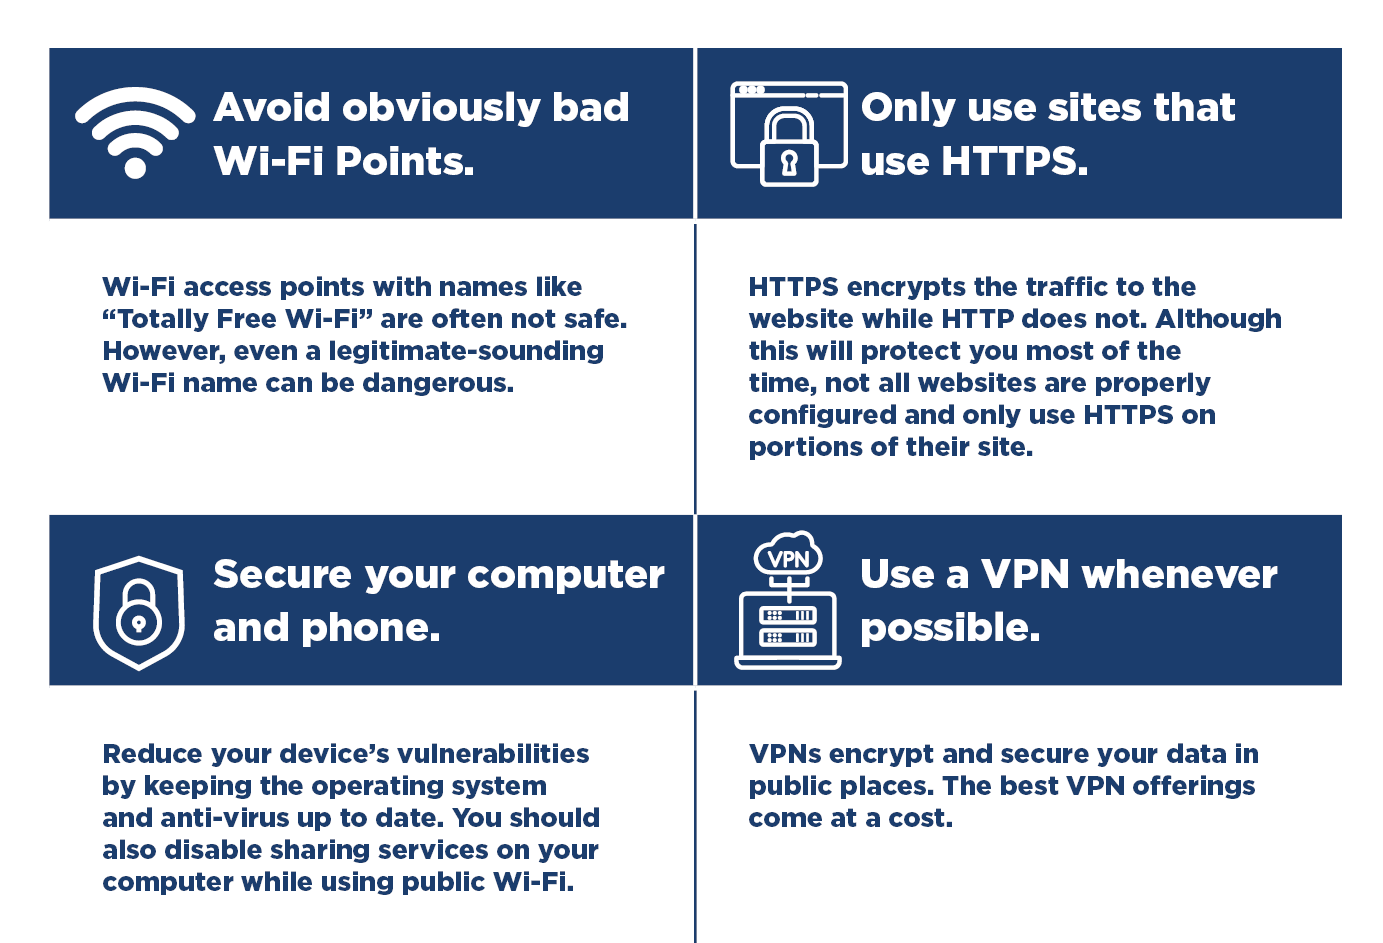 Tips for using public wi-fi safely